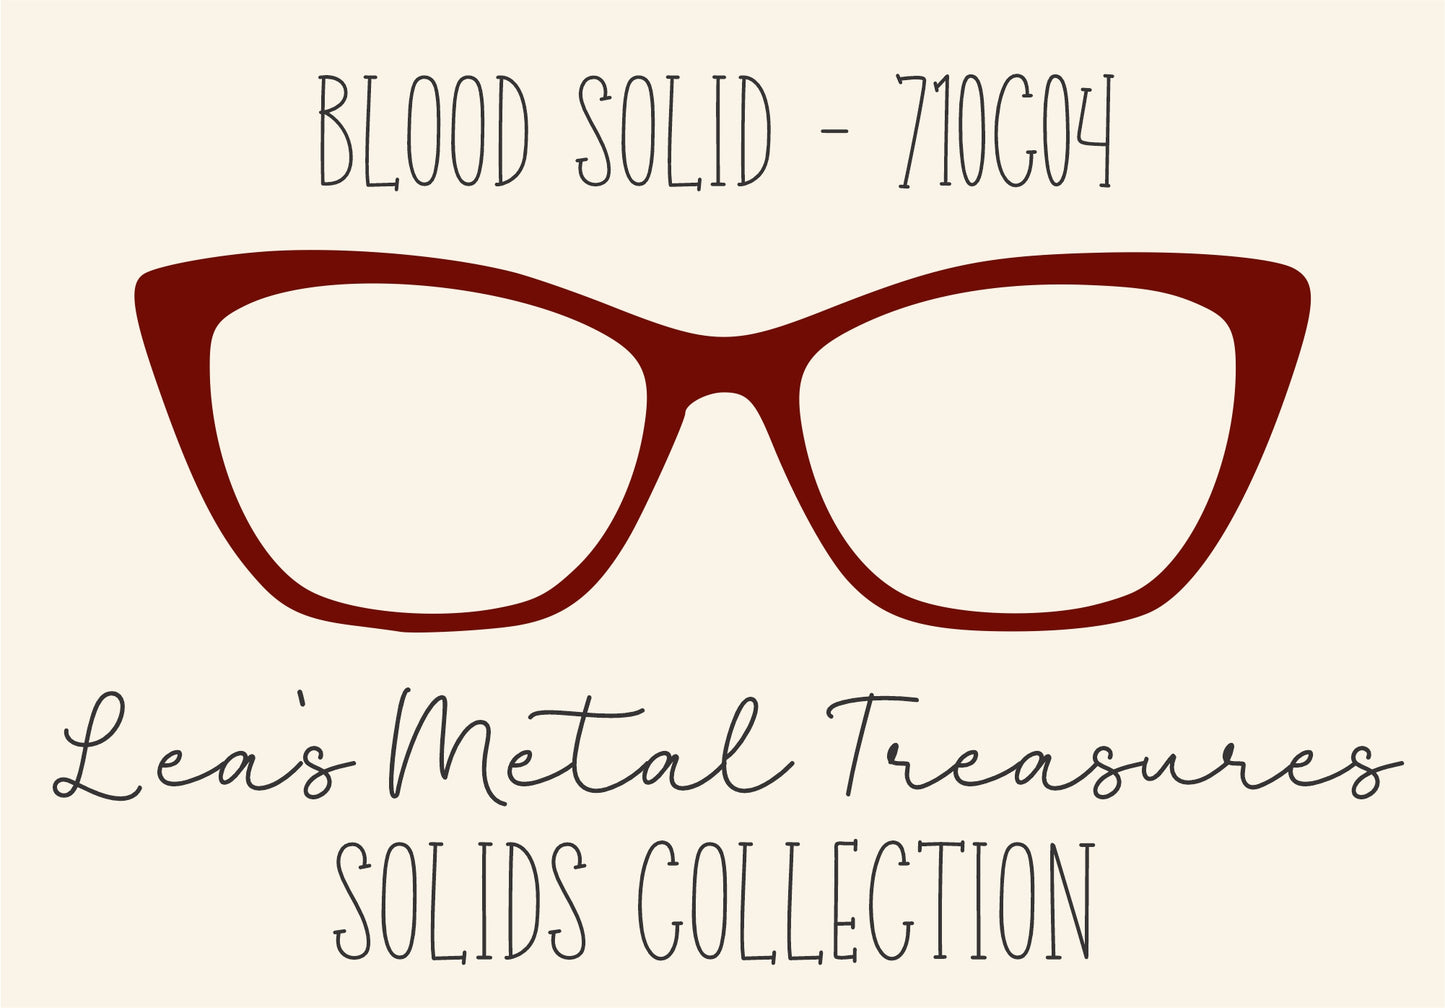 BLOOD SOLID 710C04 Eyewear Frame Toppers COMES WITH MAGNETS